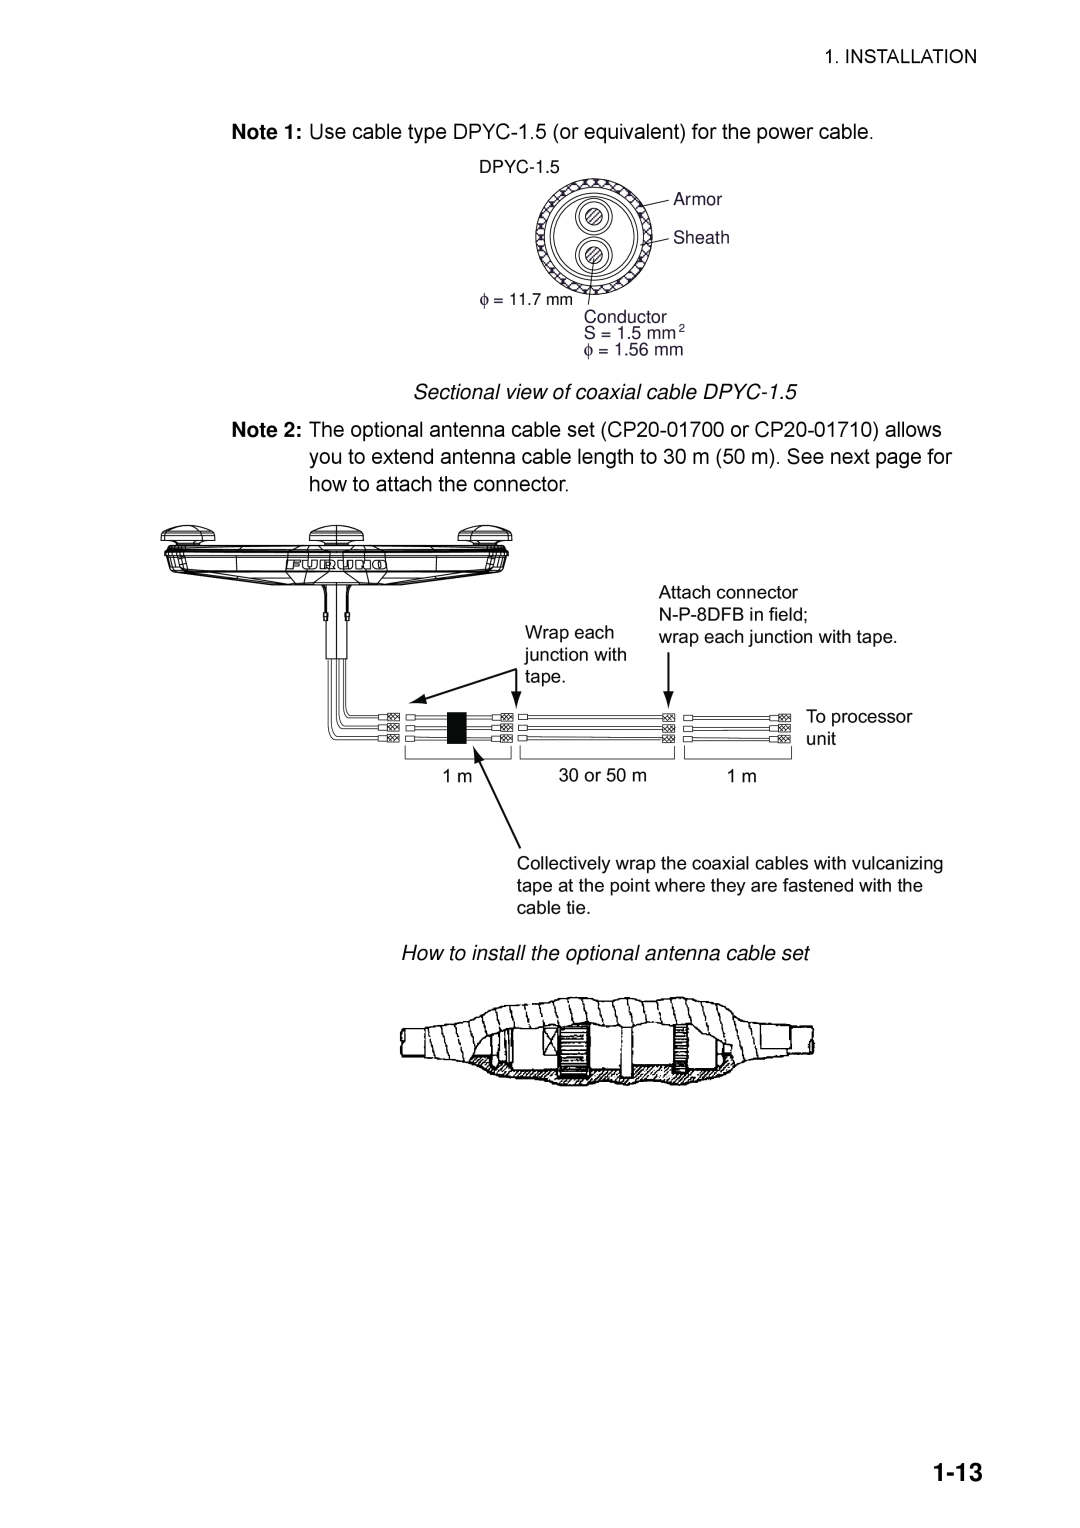 Furuno SC-110 manual 1-13, Sectional view of coaxial cable DPYC-1.5, How to install the optional antenna cable set 